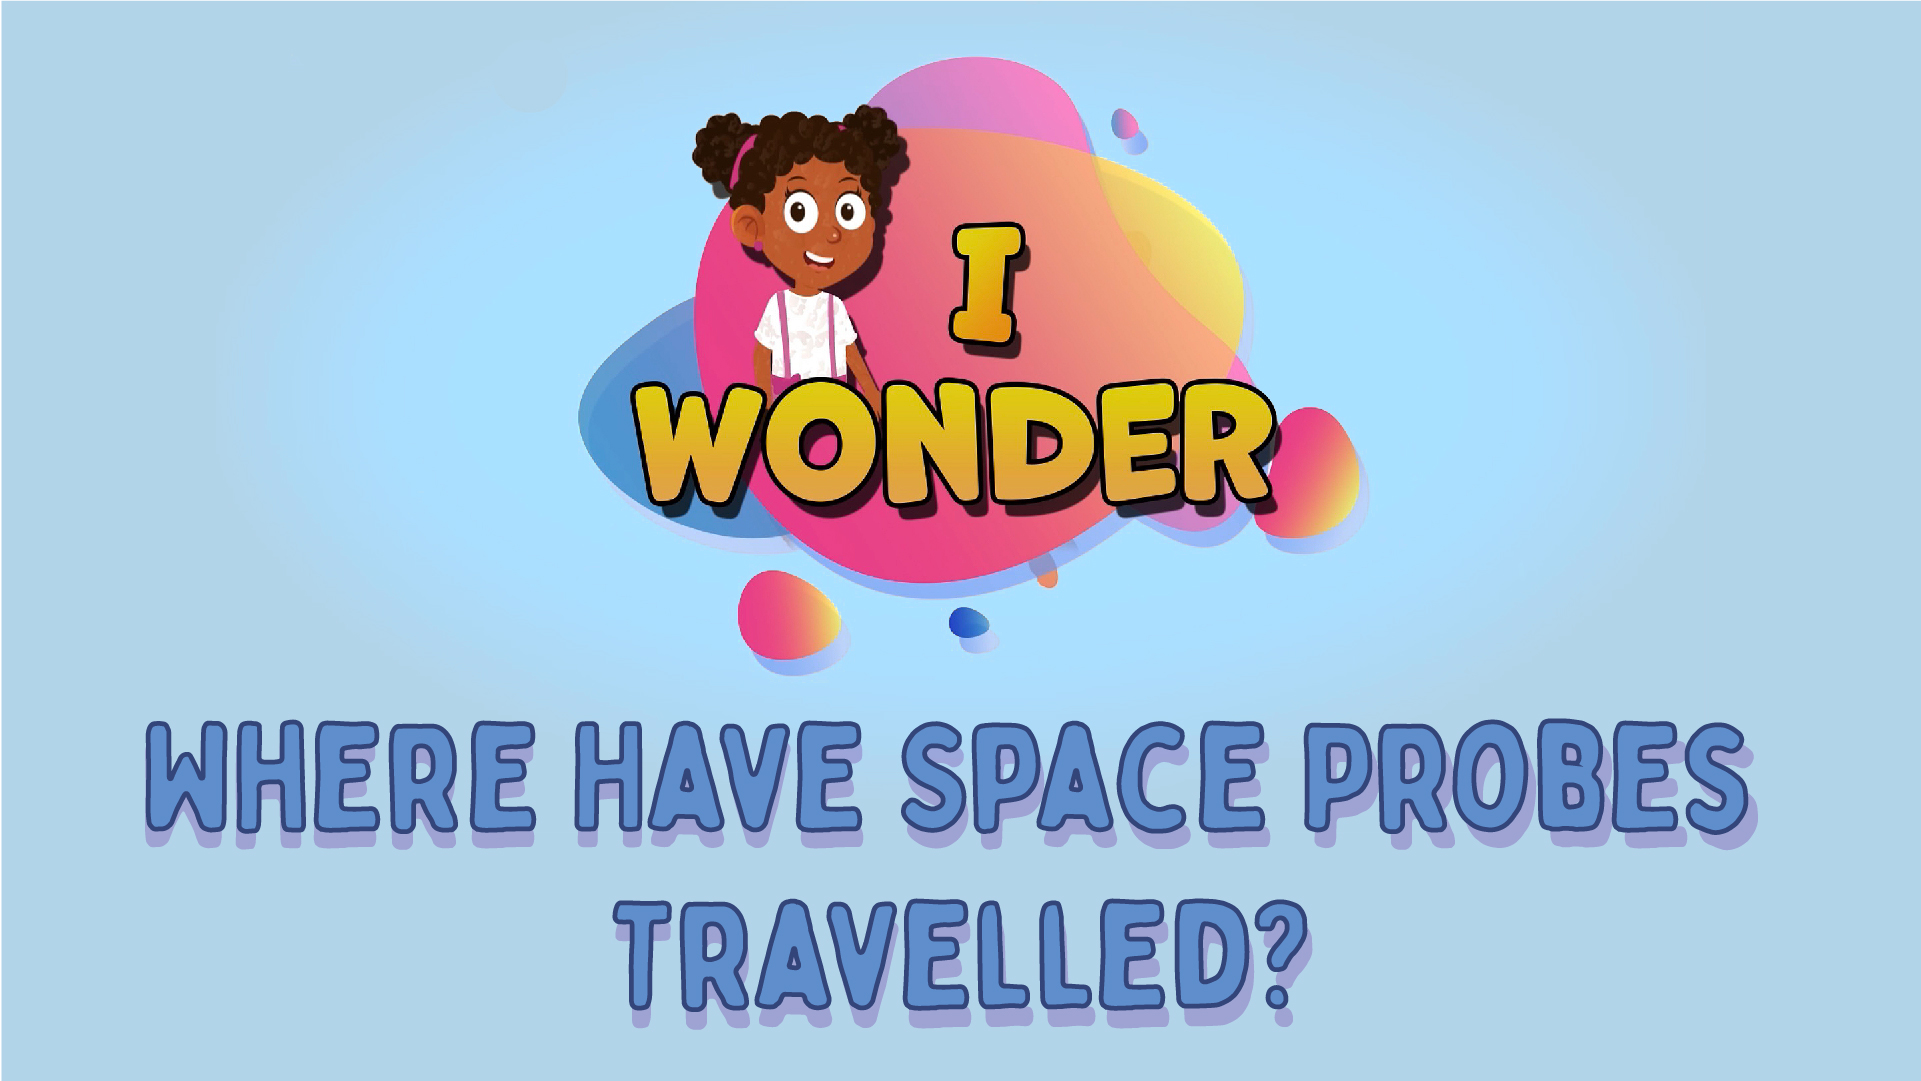 Where Have Space Probes Travelled?